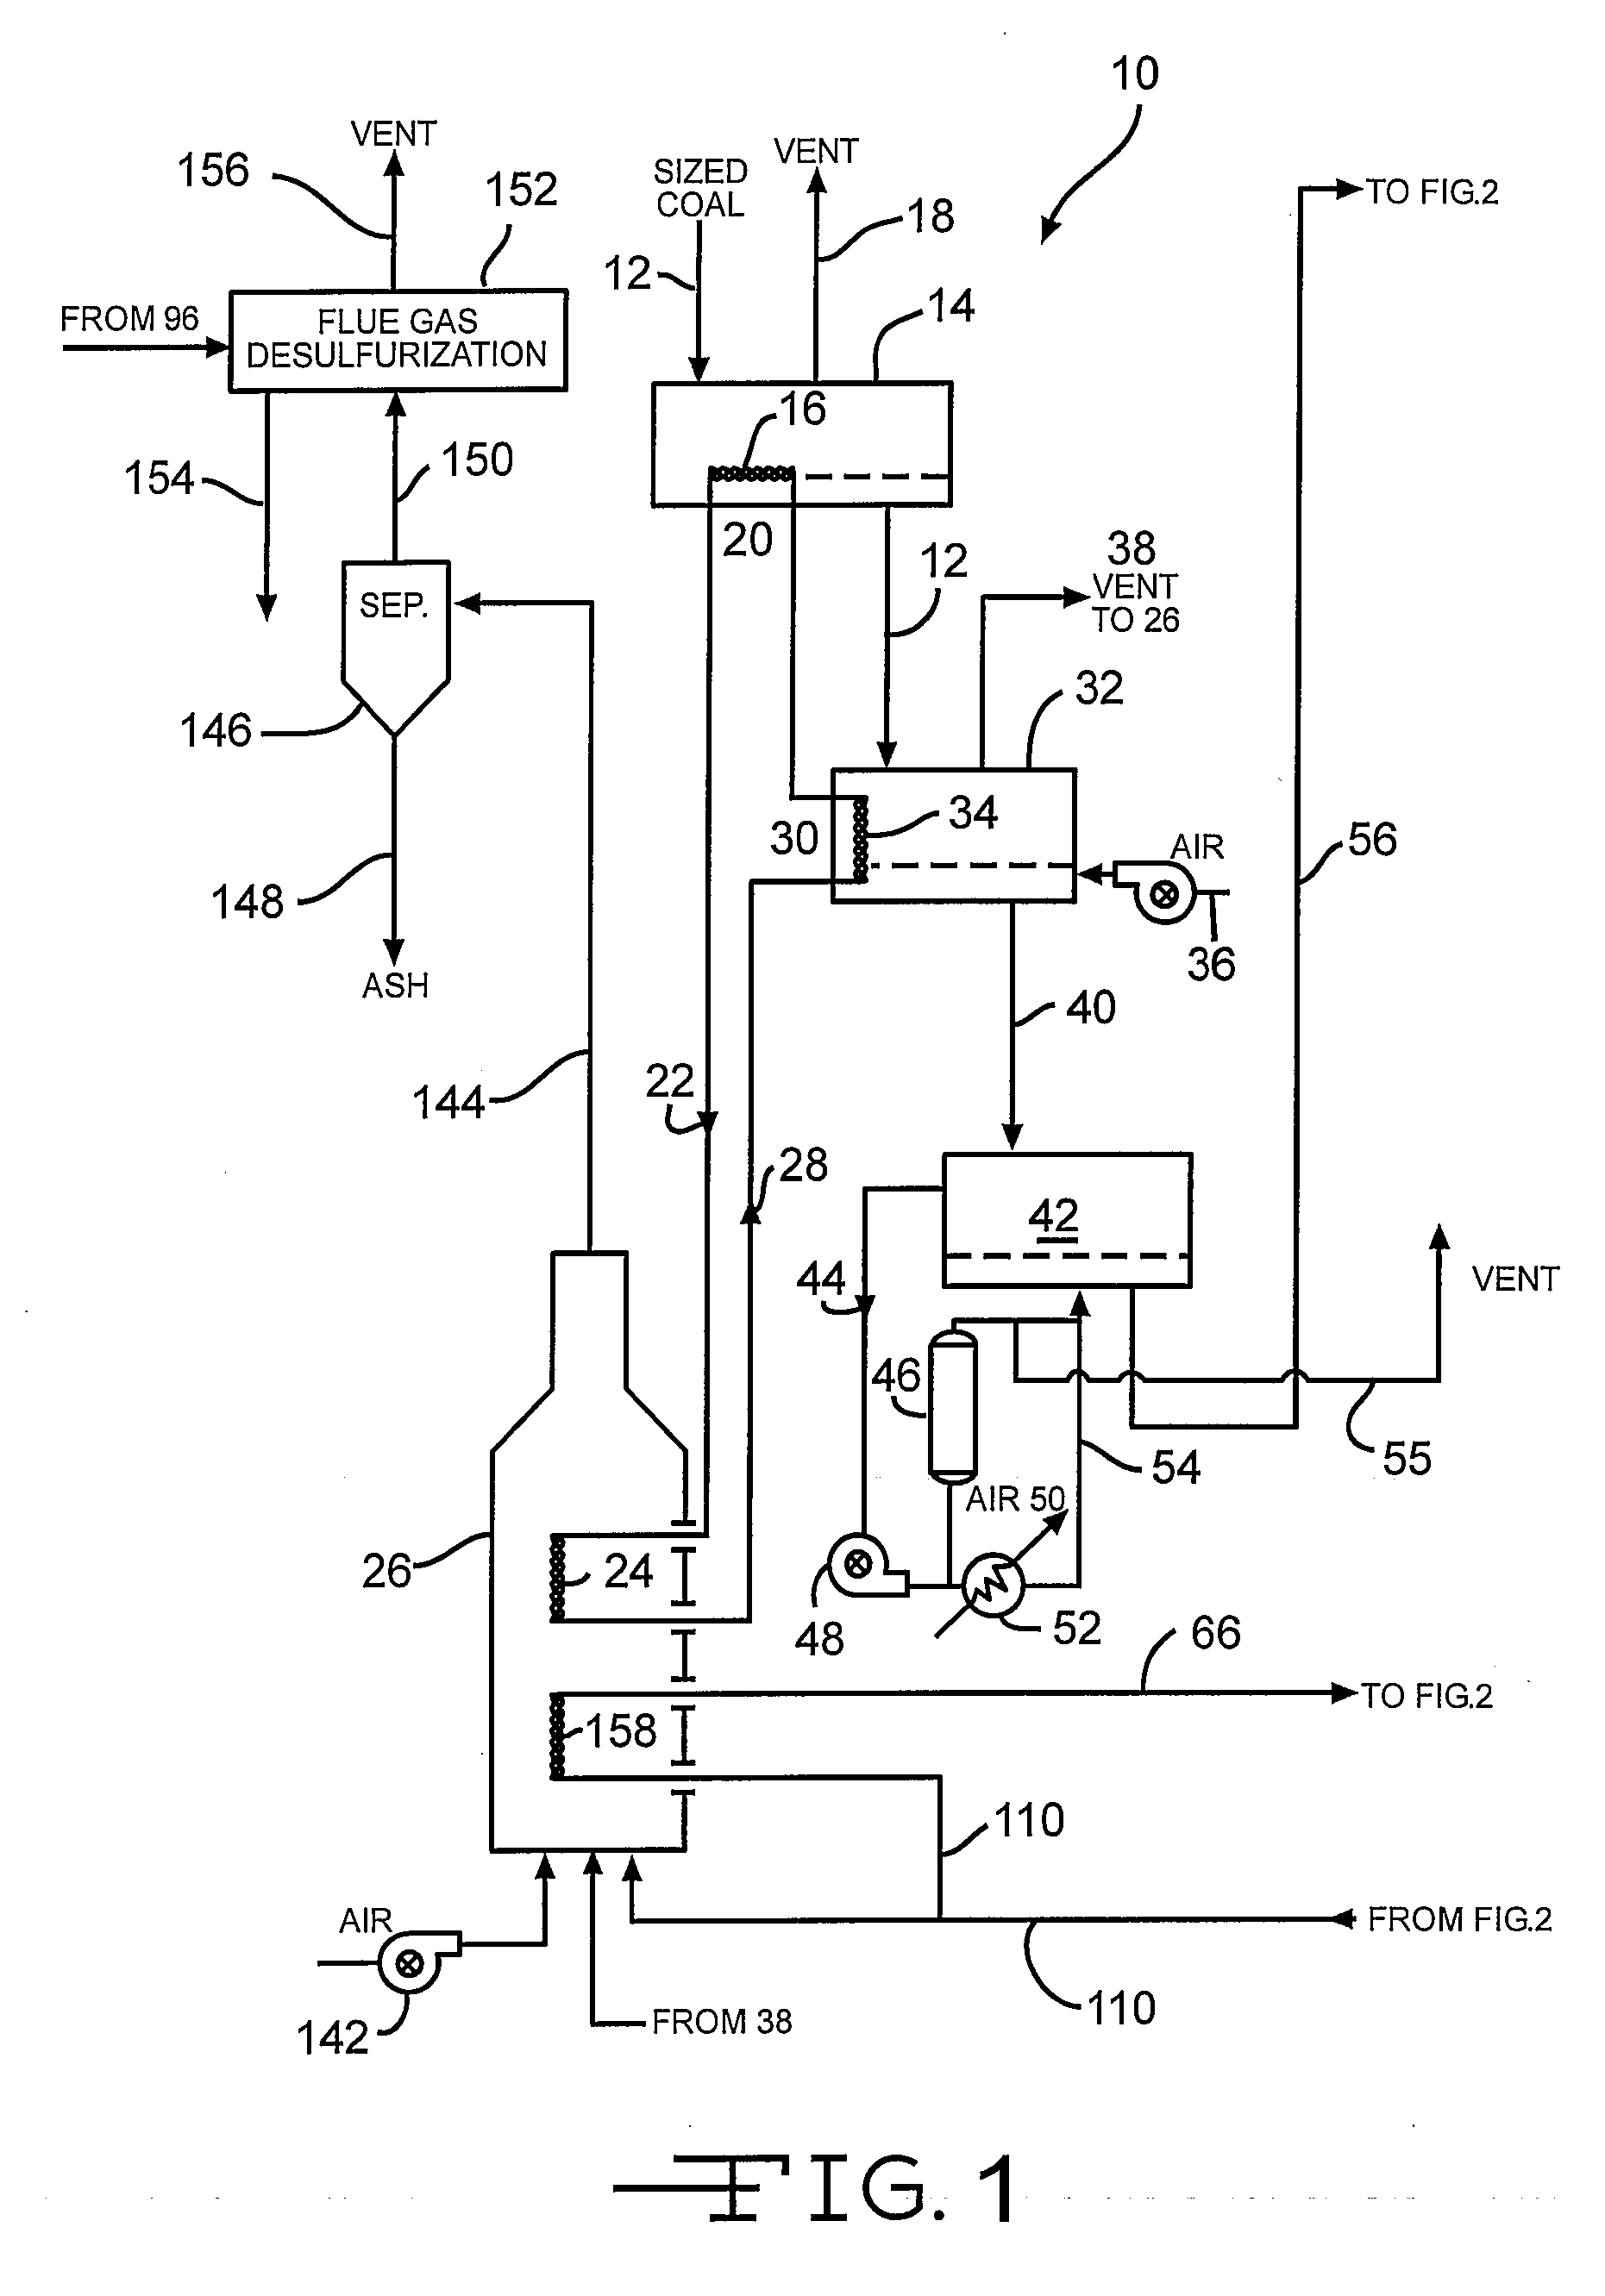 Process for treating bituminous coal by removing volatile components